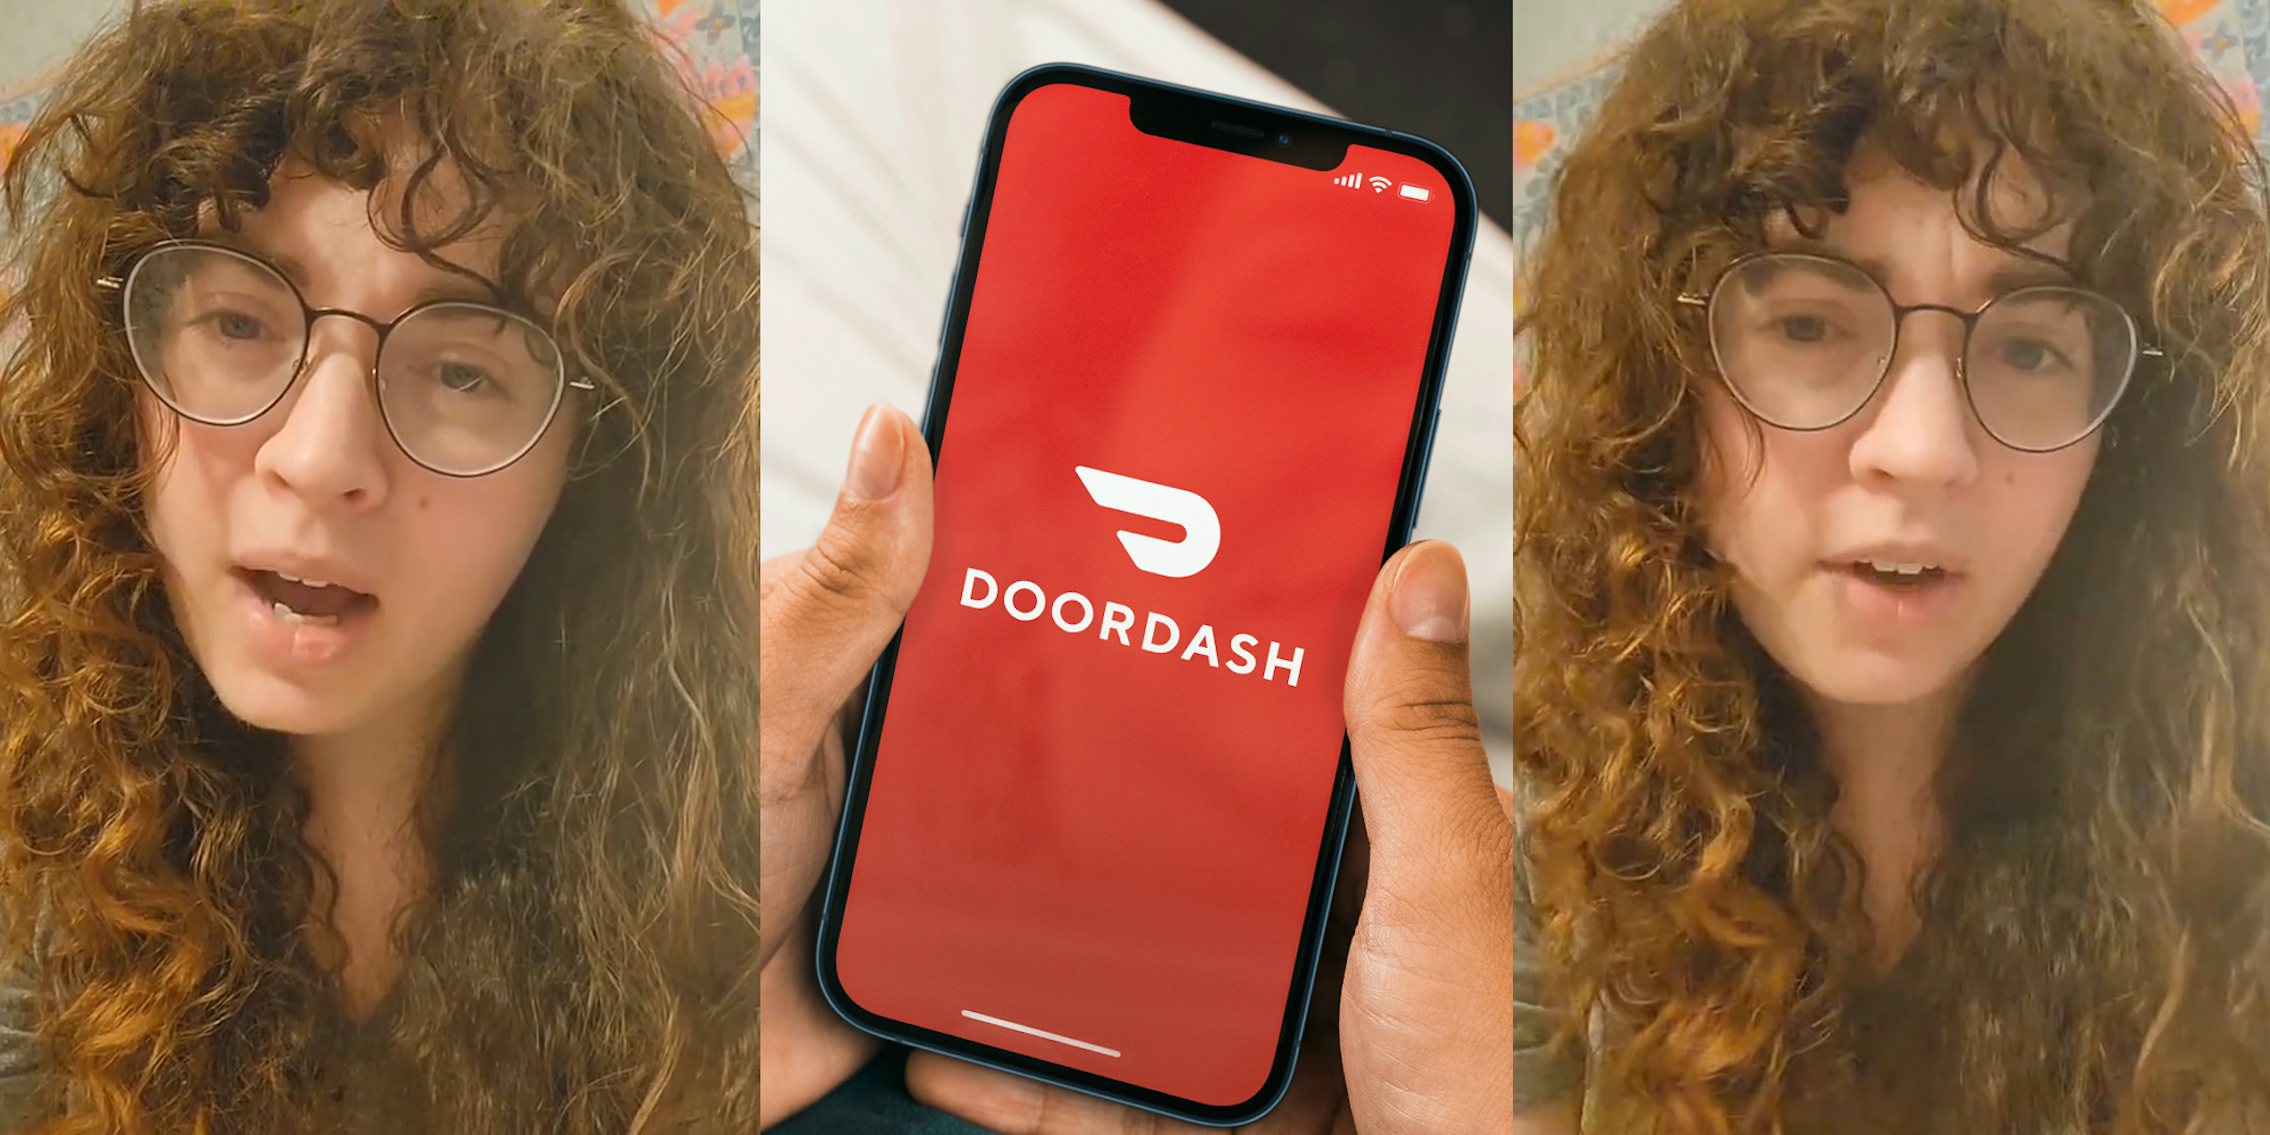 person speaking (l) hands holding DoorDash open on phone in front of white and gray background (c) person speaking (r)